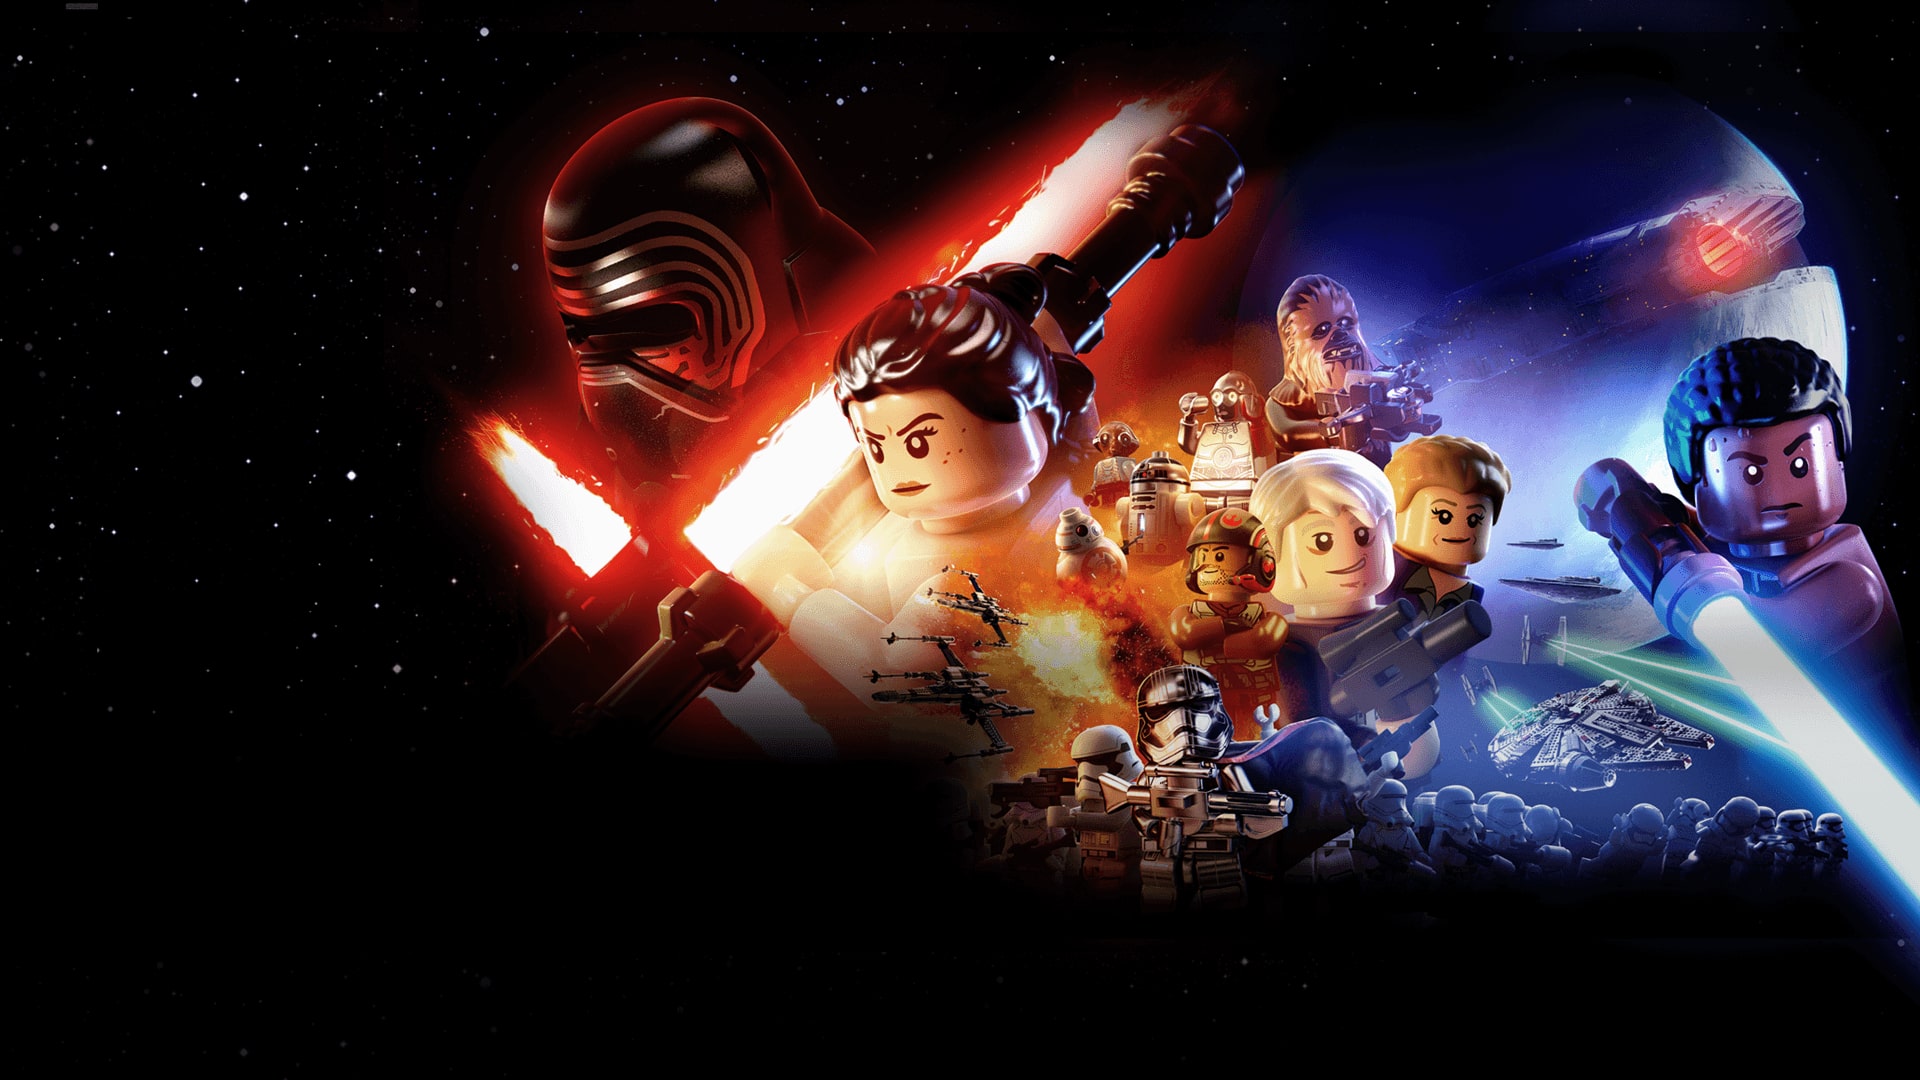 LEGO® Star Wars™: The Force Awakens PLAYSTATION® 4 Video Game 5005139, Star  Wars™